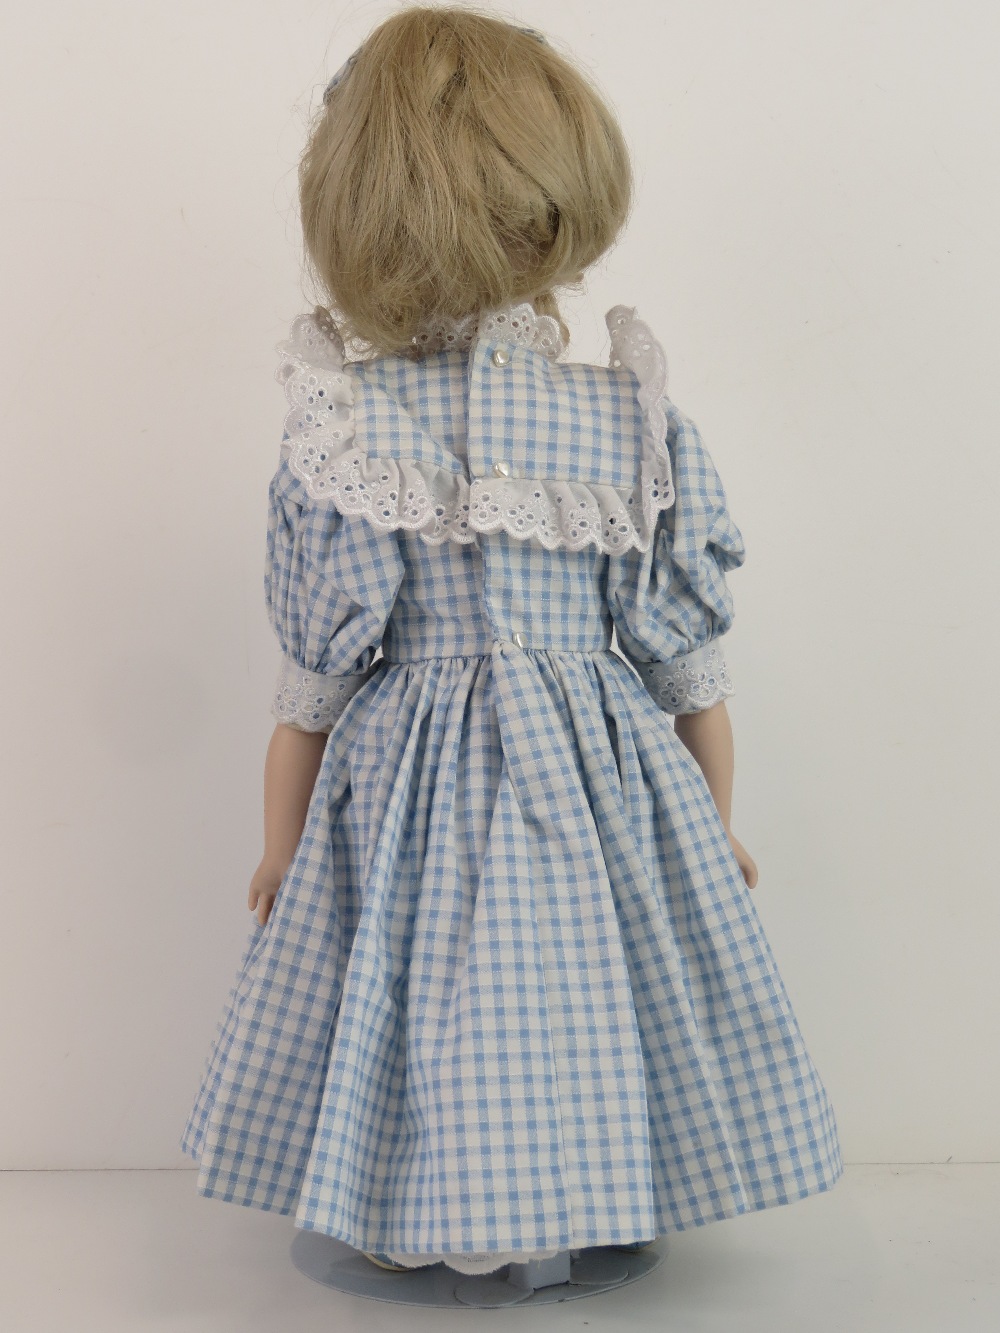 A handmade 20th century bisque headed doll made using an antique doll mould, - Image 6 of 7